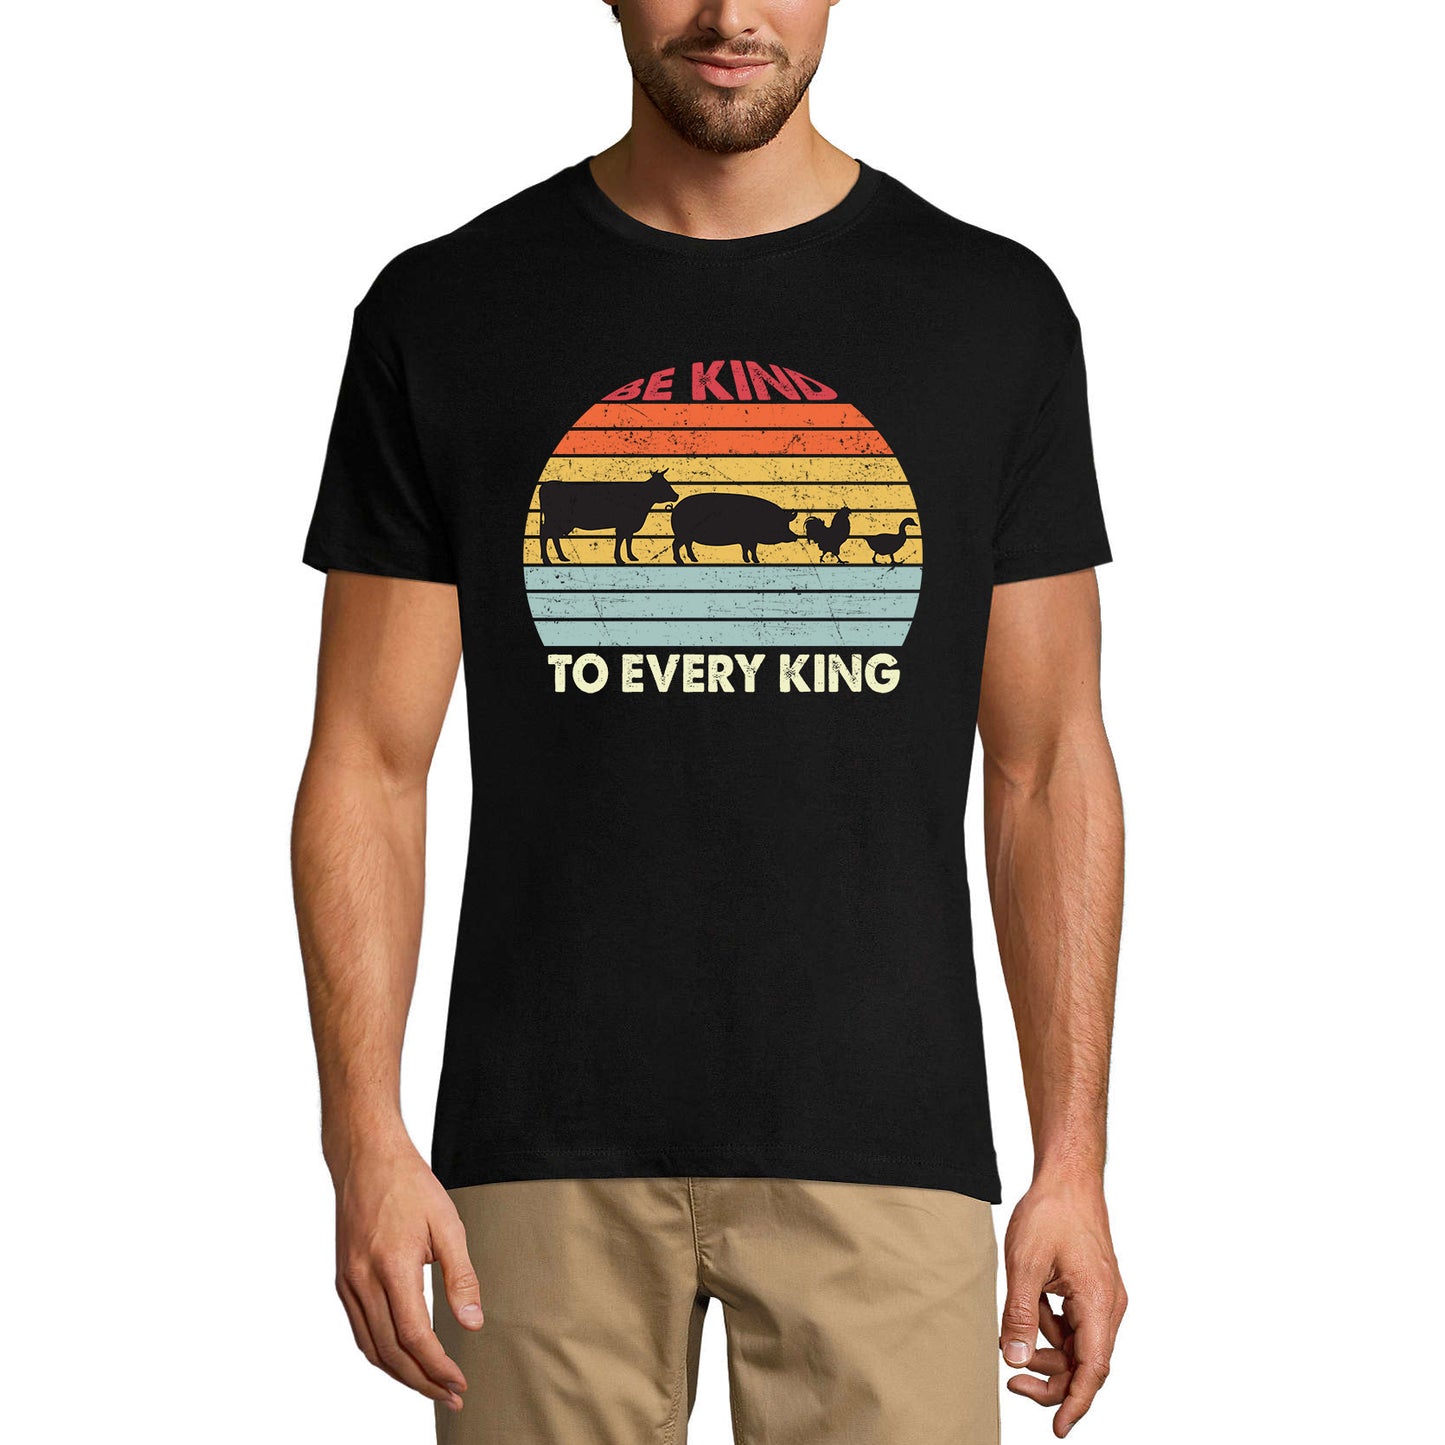 ULTRABASIC Men's Graphic T-Shirt Be Kind to Every King - Funny Retro Animal Lover Tee Shirt